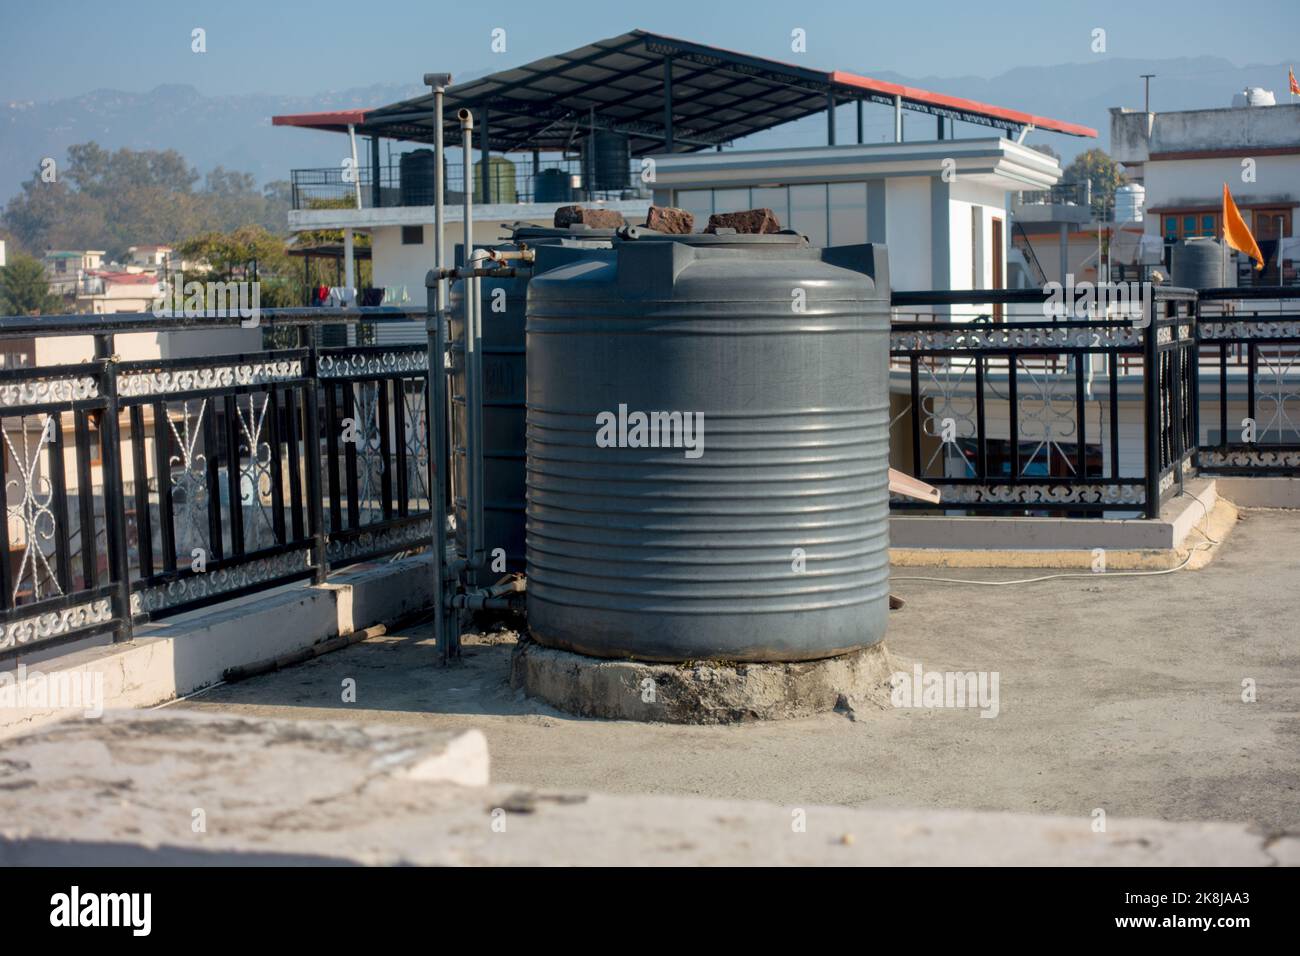 february 12th 2022, Dehradun City India. Big plastic water tanks on a roof top of a building in Urban area. Stock Photo